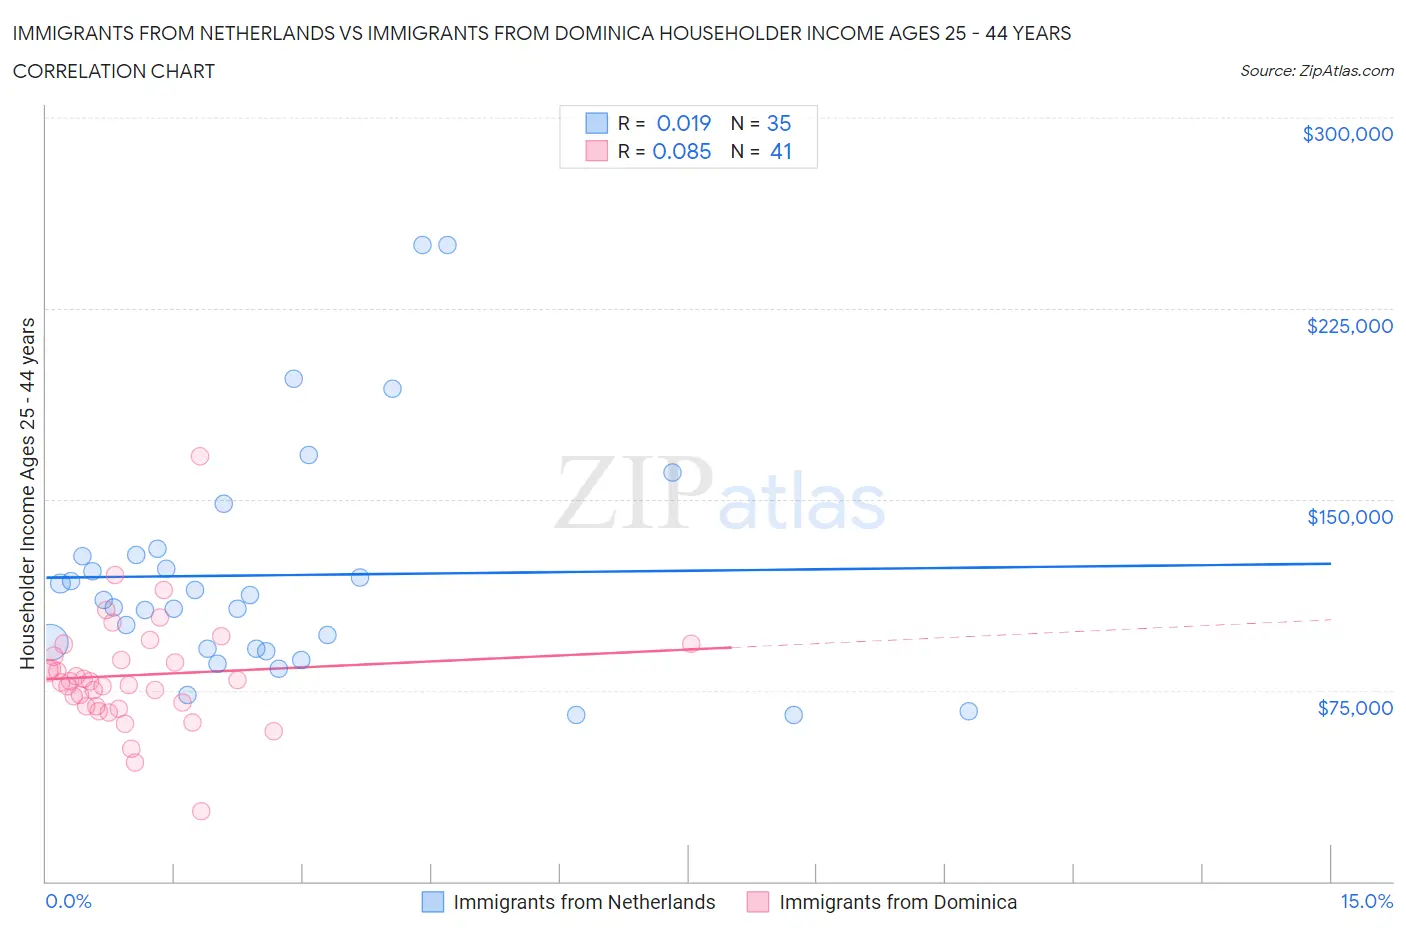 Immigrants from Netherlands vs Immigrants from Dominica Householder Income Ages 25 - 44 years